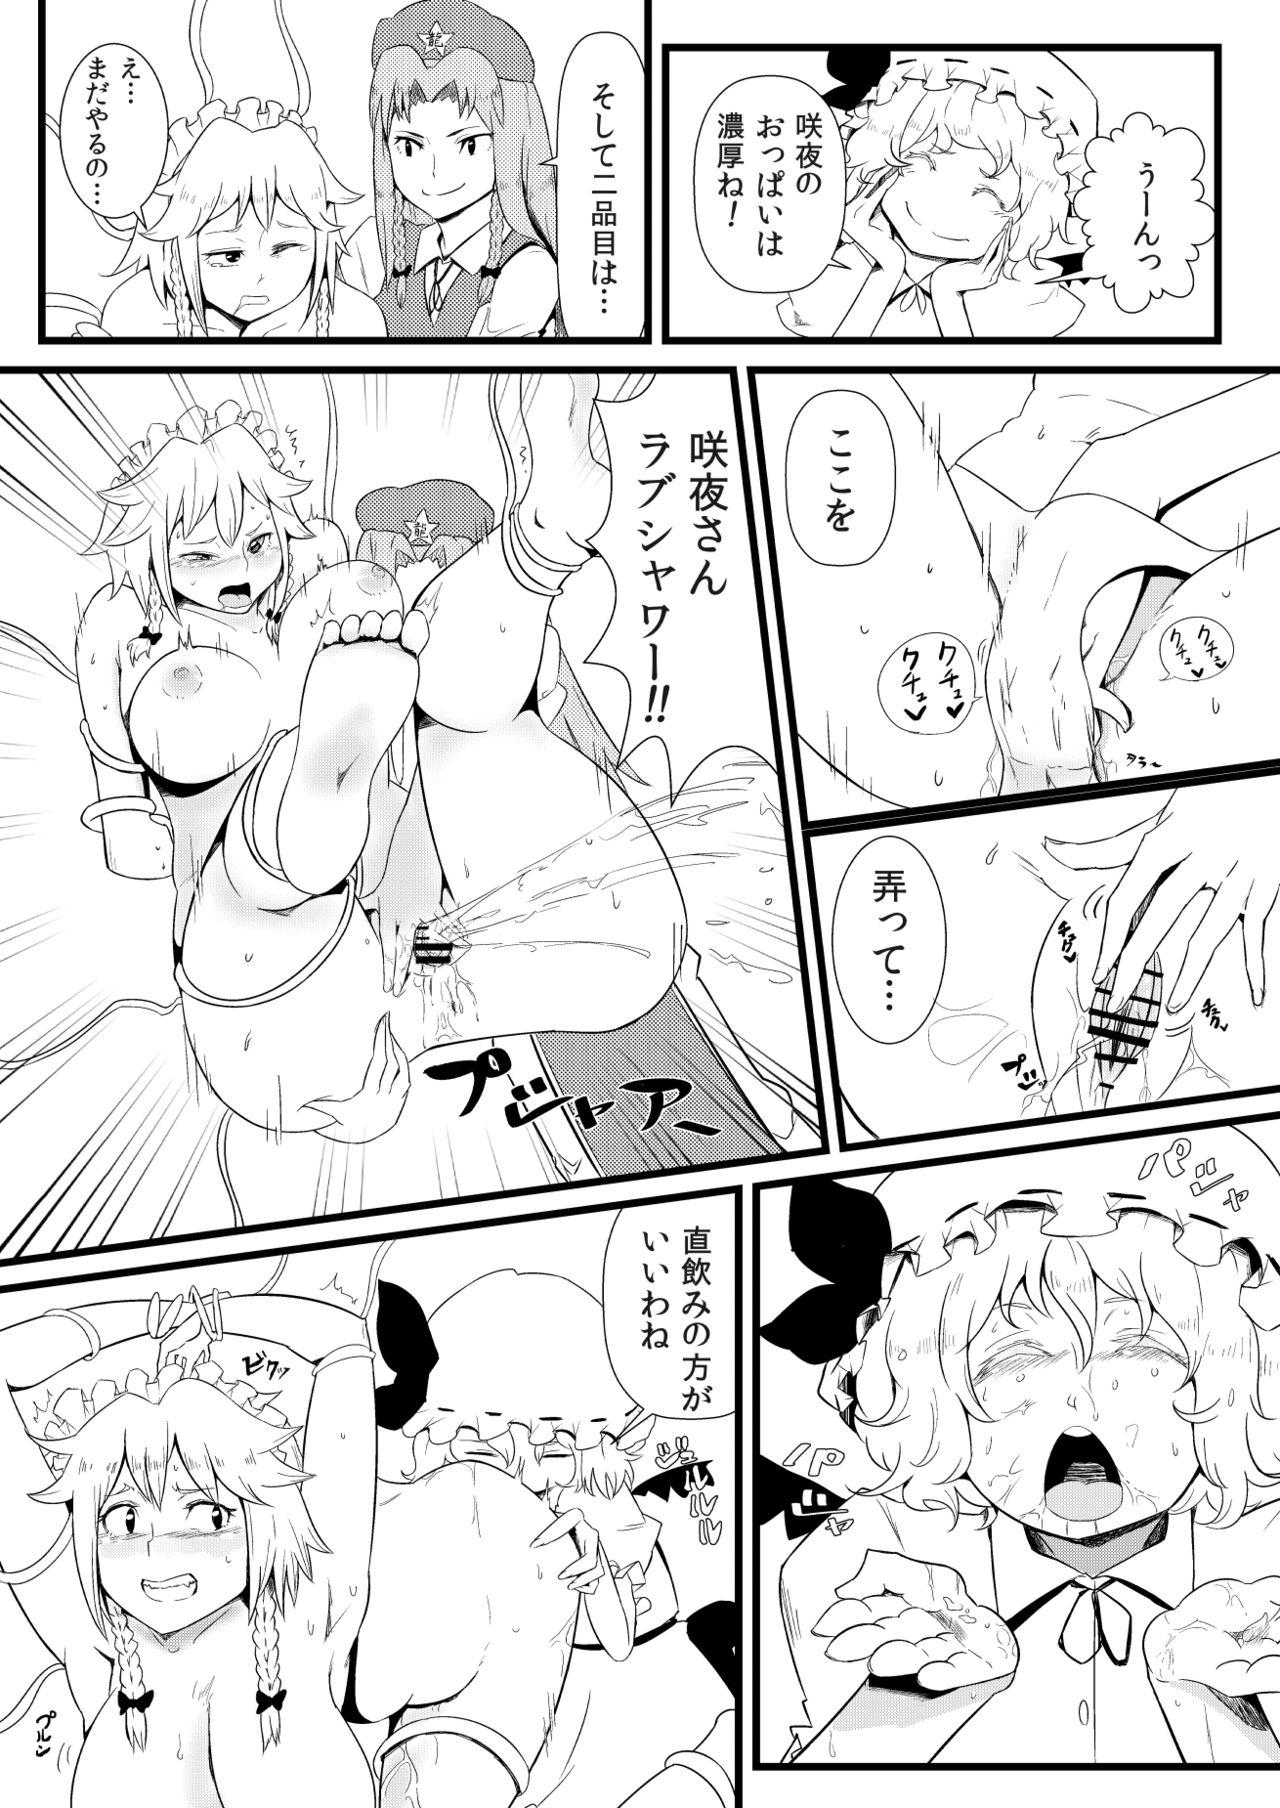 Missionary Position Porn 東方板としあき合同誌5 - Touhou project Tongue - Page 7